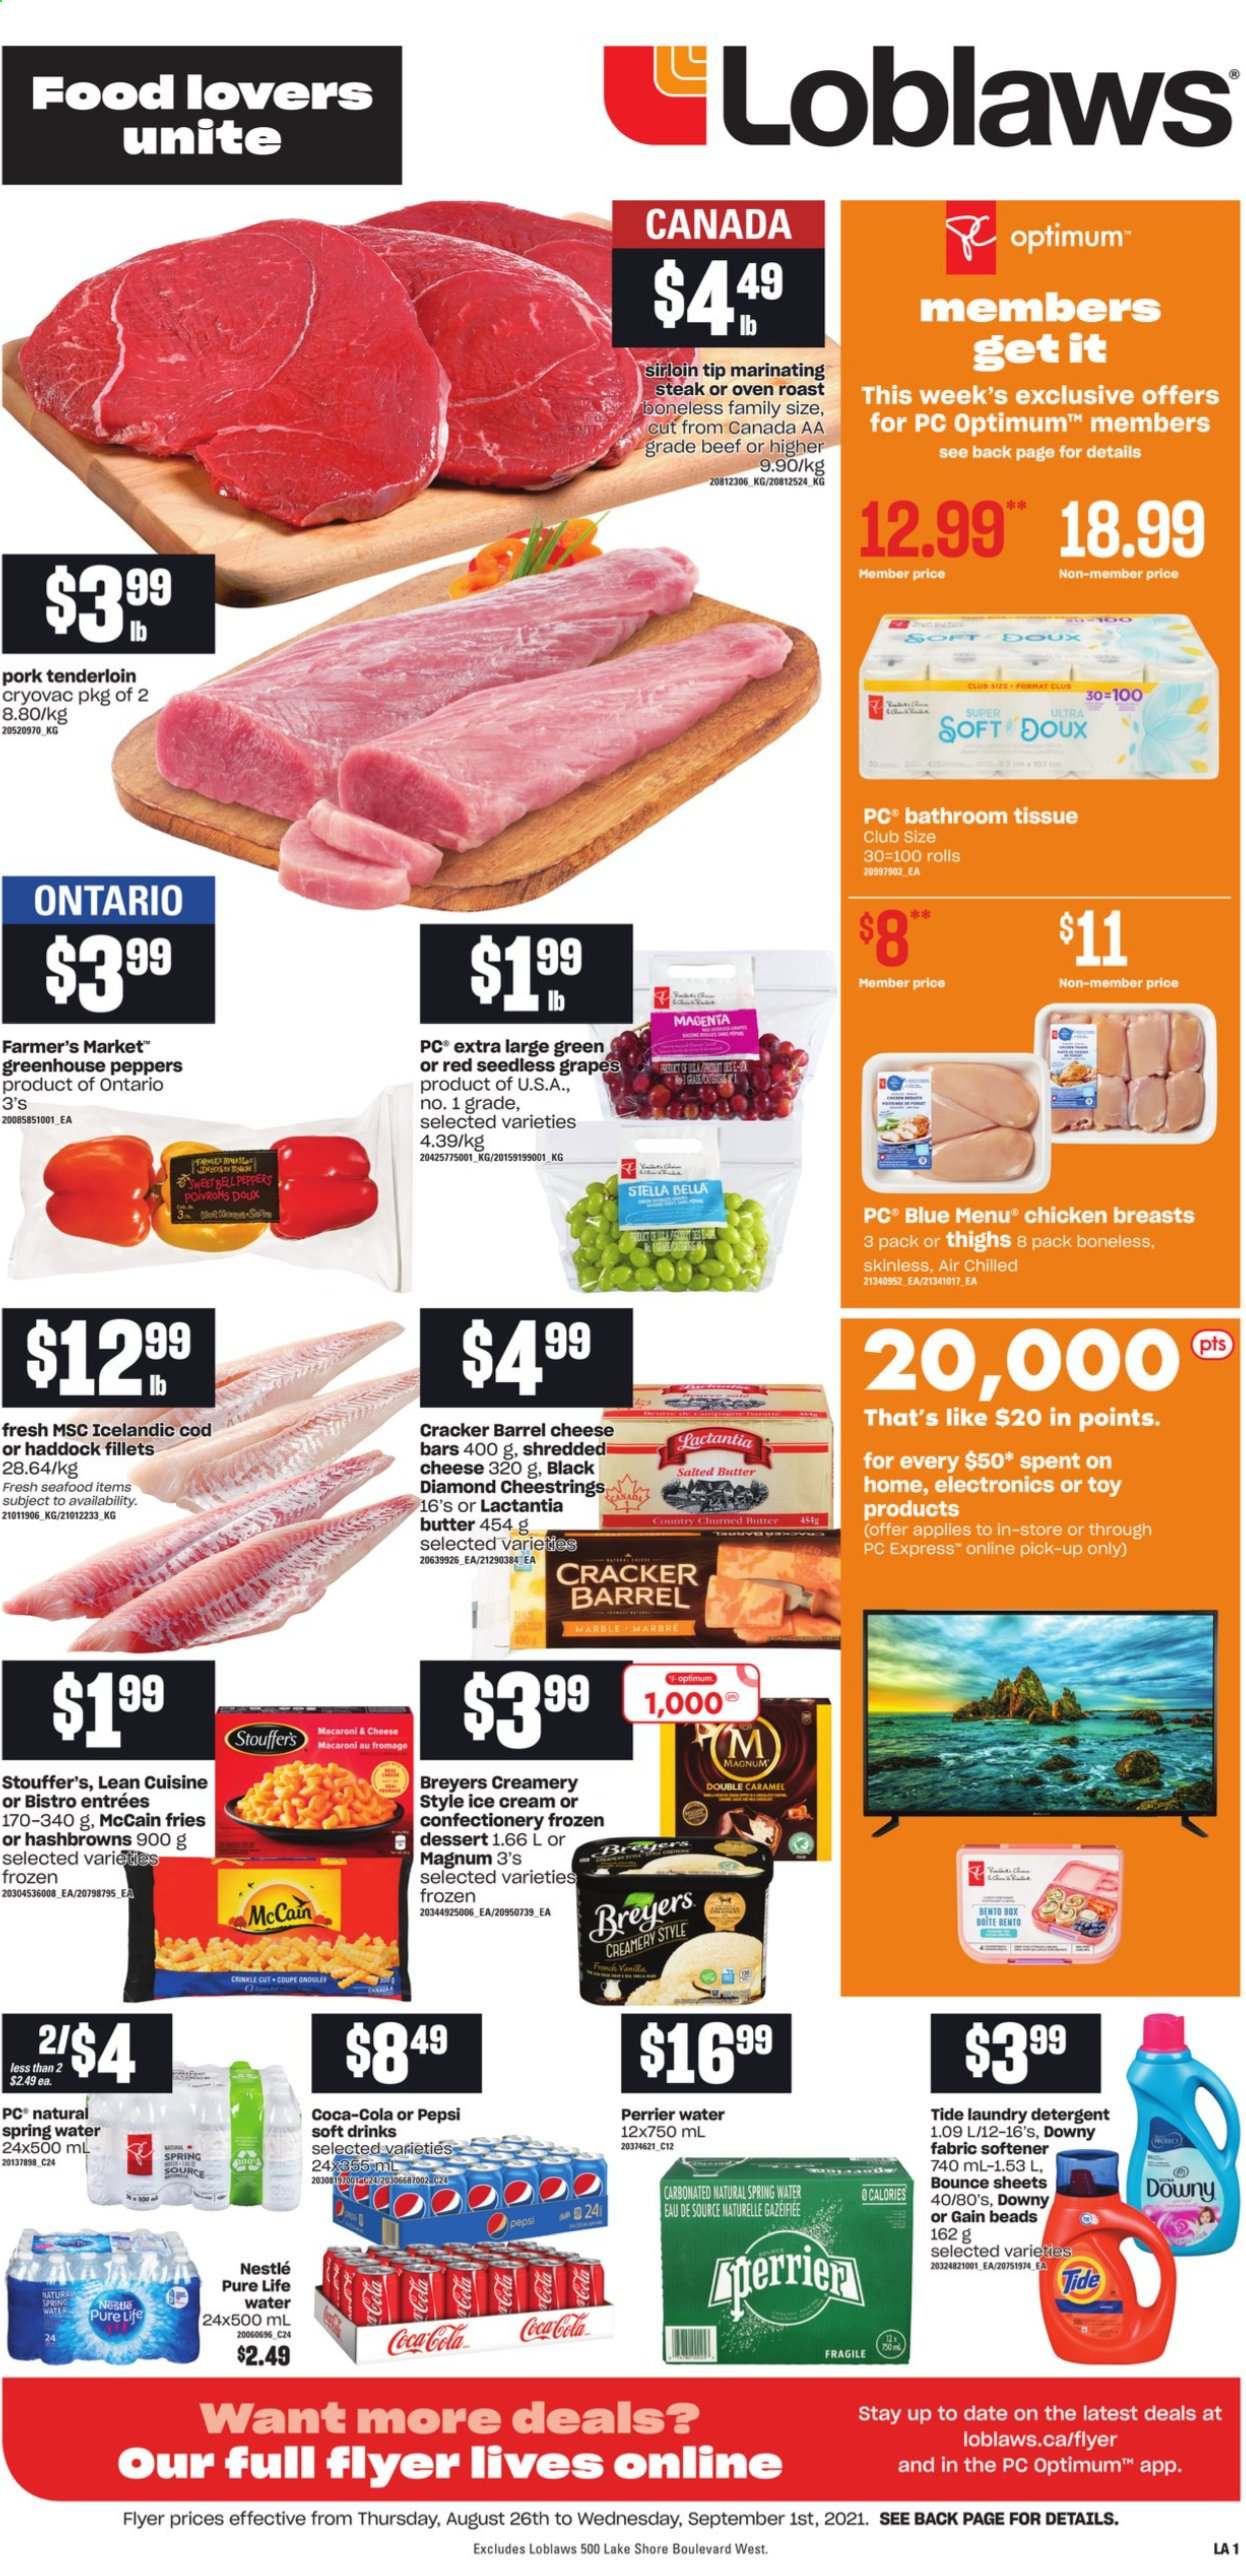 thumbnail - Loblaws Flyer - August 26, 2021 - September 01, 2021 - Sales products - bell peppers, Bella, peppers, grapes, seedless grapes, cod, haddock, seafood, macaroni & cheese, Lean Cuisine, shredded cheese, string cheese, butter, salted butter, Magnum, ice cream, Stouffer's, McCain, hash browns, potato fries, crackers, Coca-Cola, Pepsi, soft drink, Perrier, spring water, Pure Life Water, chicken breasts, pork meat, pork tenderloin, bath tissue, Gain, Tide, fabric softener, laundry detergent, Bounce, Downy Laundry, Optimum, Nestlé, steak. Page 1.